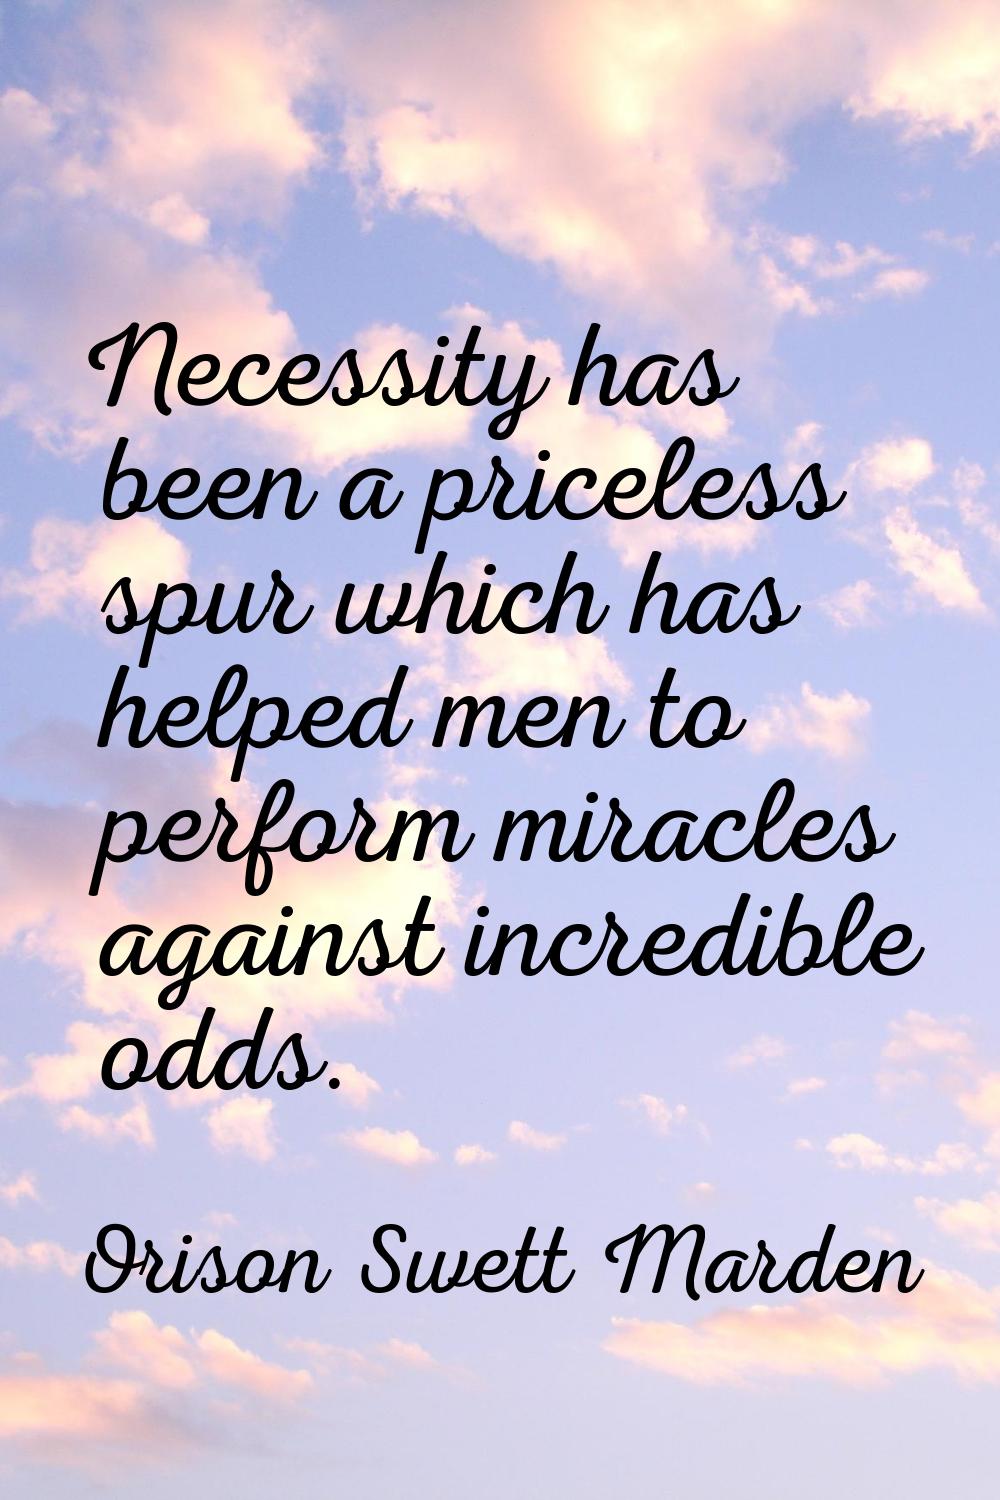 Necessity has been a priceless spur which has helped men to perform miracles against incredible odd